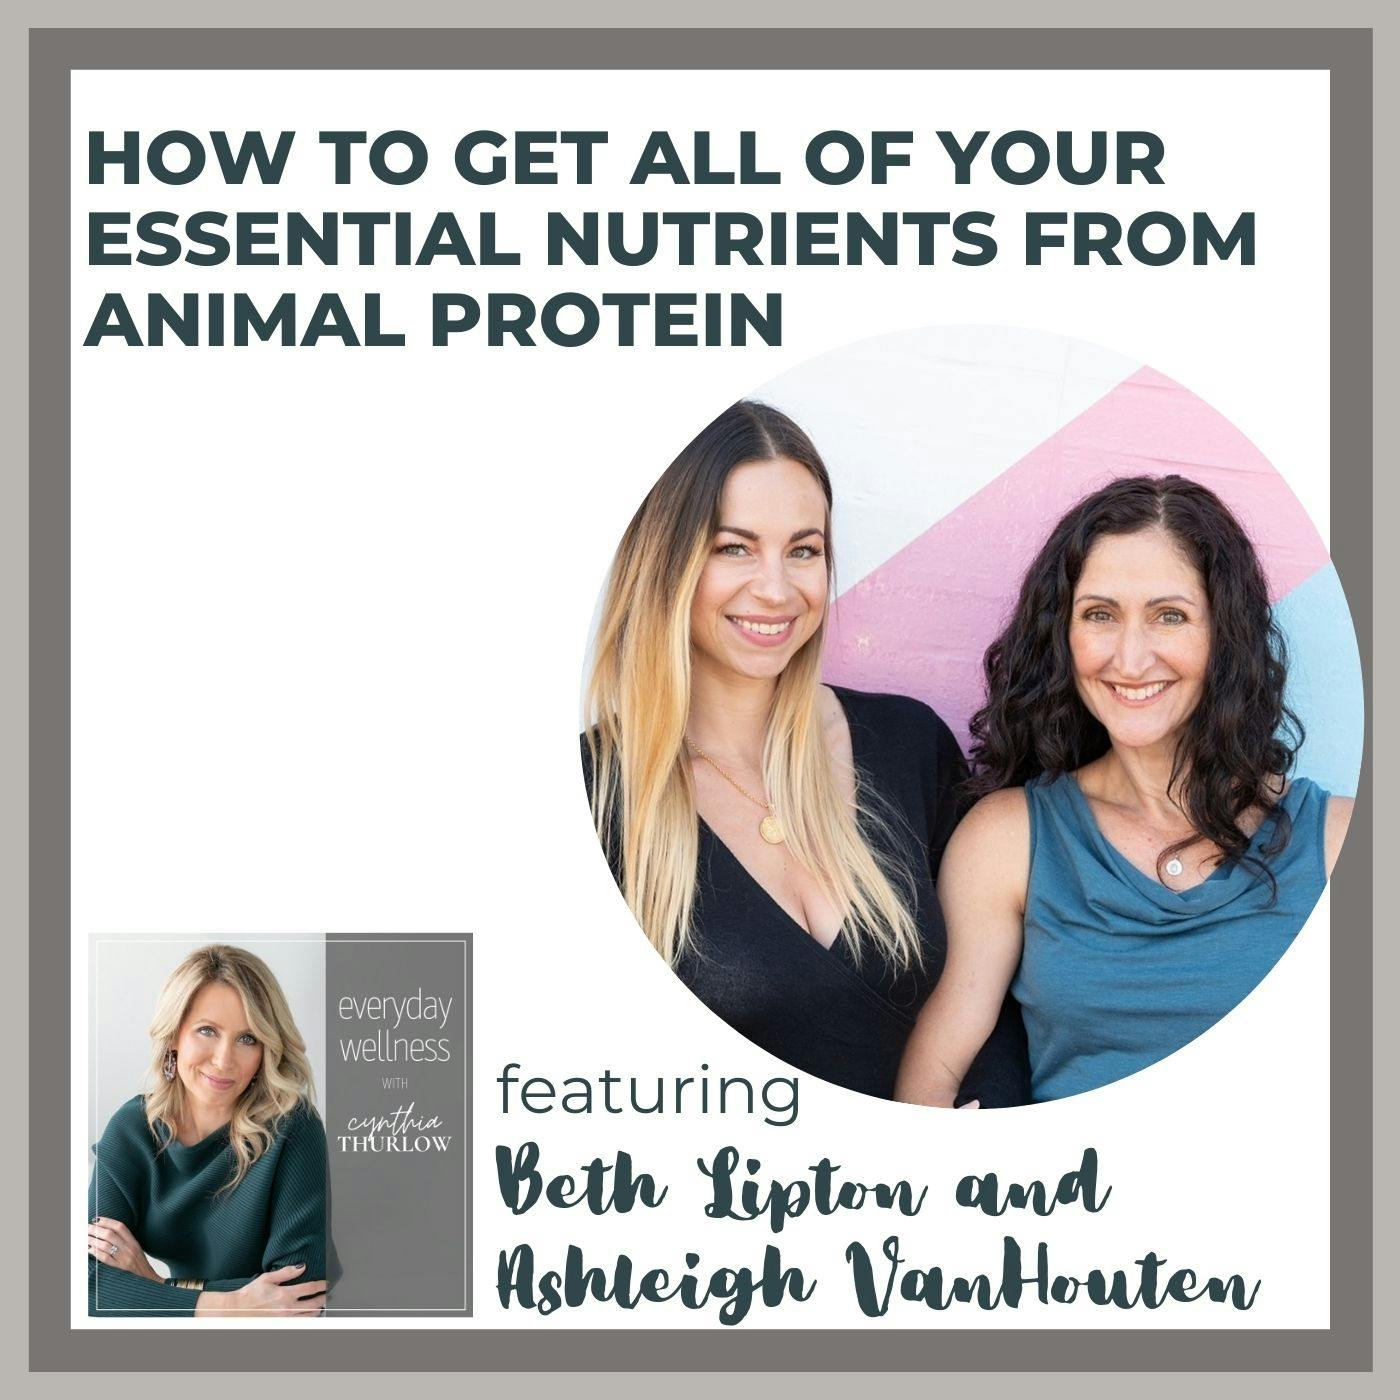 Ep. 192 How to Get All of Your Essential Nutrients from Animal Protein with Ashleigh VanHouten and Beth Lipton